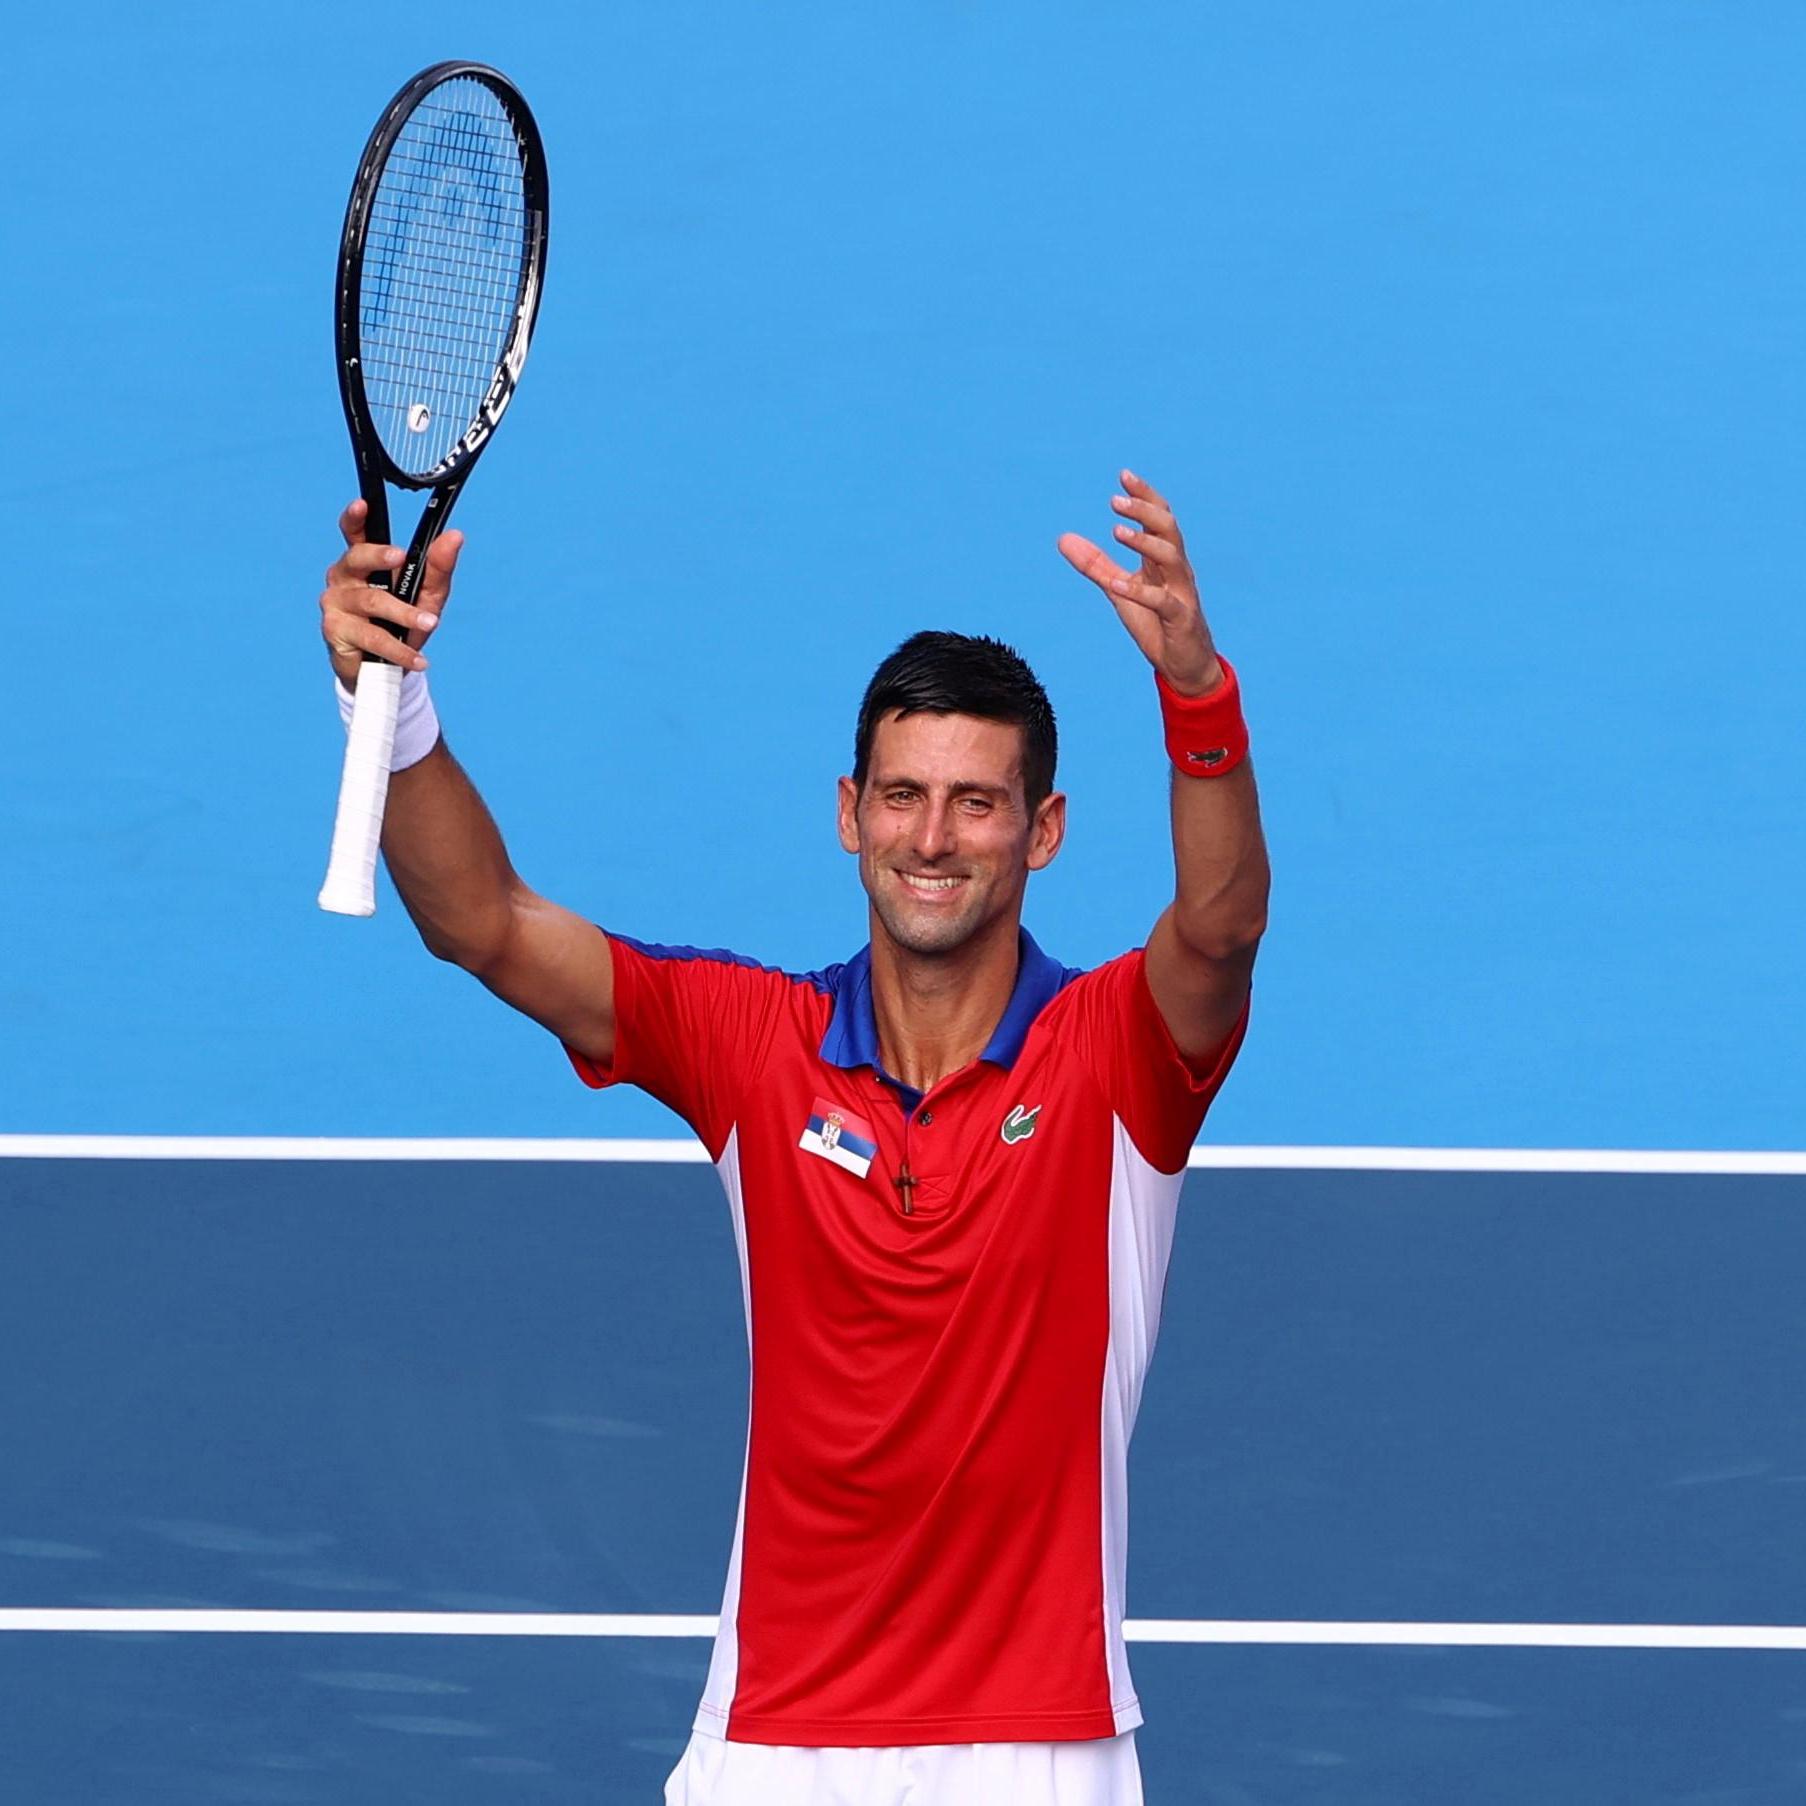 Olympics-Tennis-As selfie requests pile up, Djokovic thrives on Games' energy